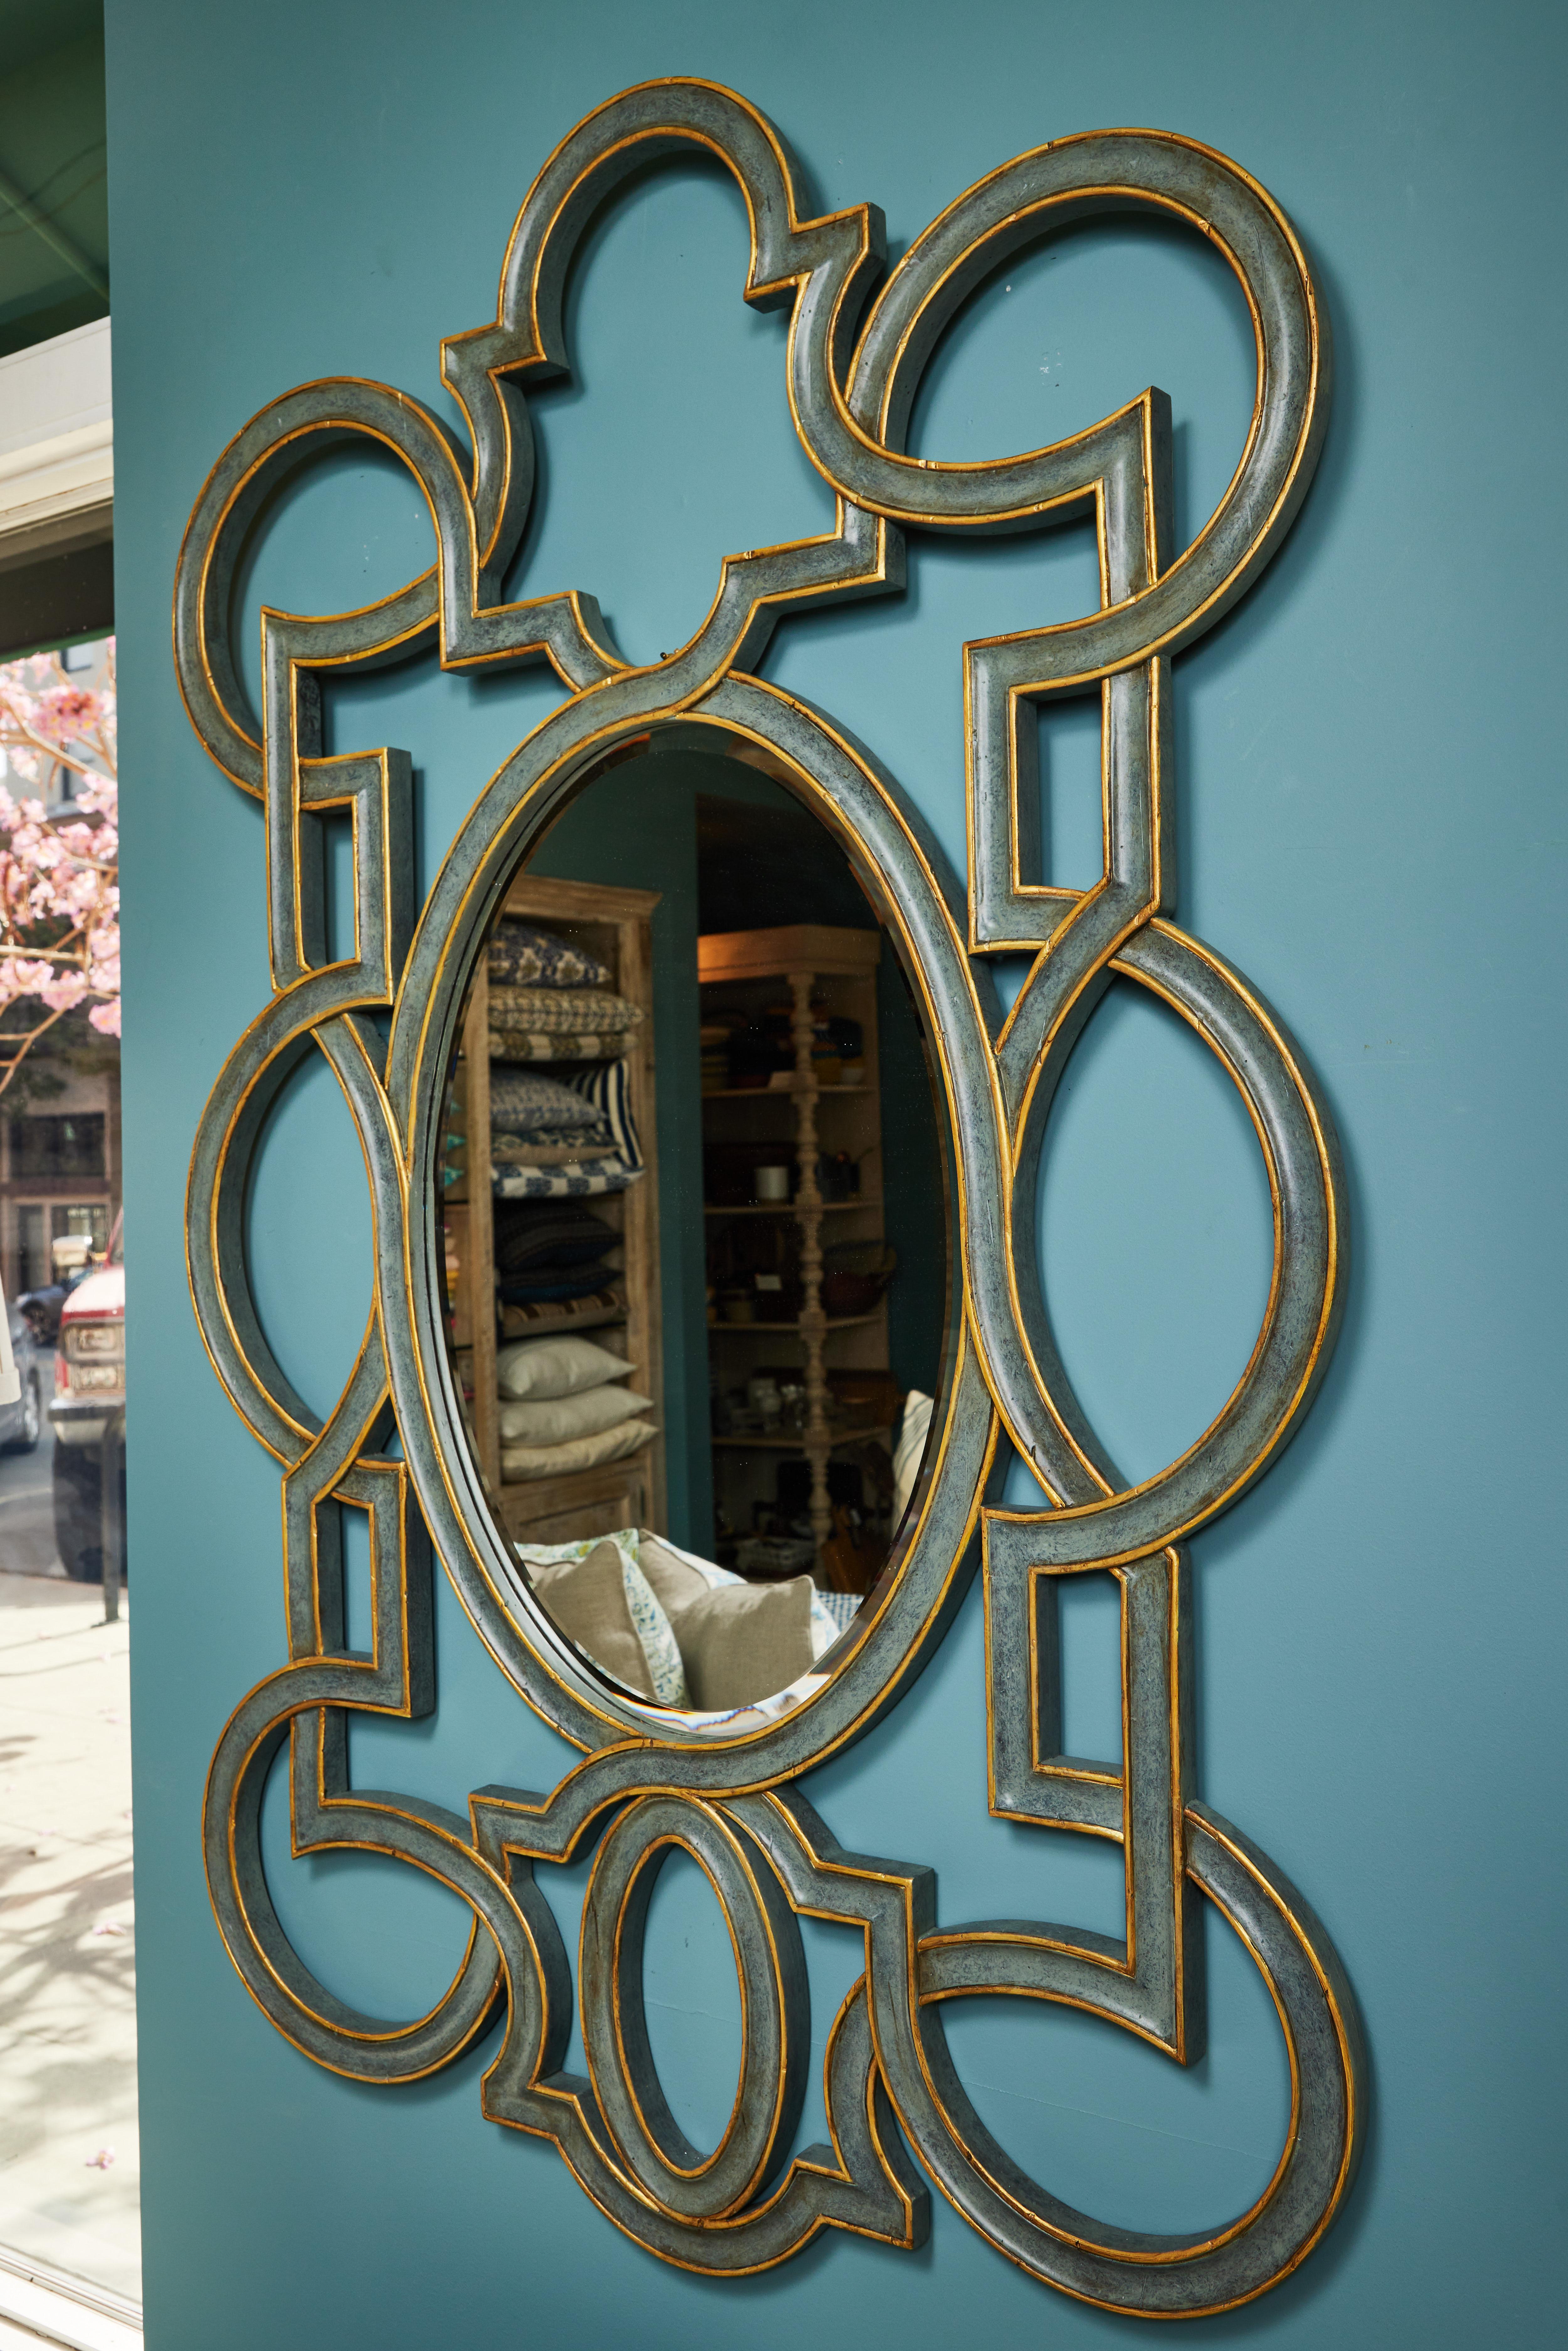 This fantastic large scale vintage mirror has oval beveled center mirror surrounded by an elaborate open fretwork frame. The frame has been newly painted in a distressed blue sage finish with gold detail. 

It measures 58